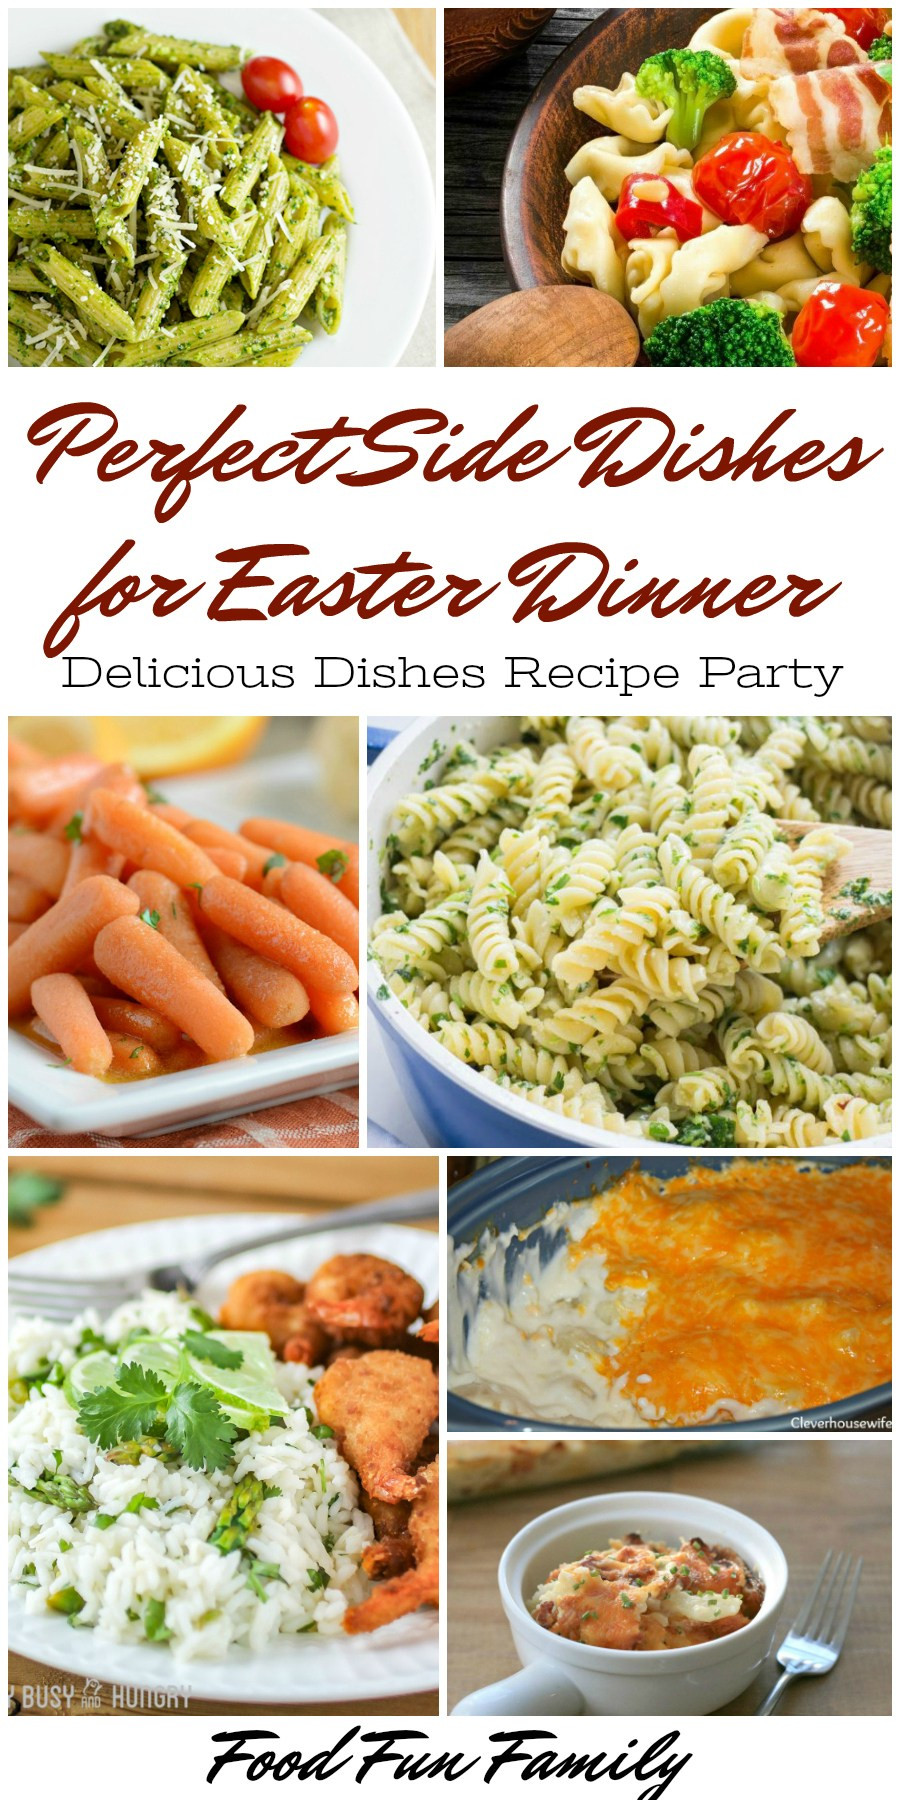 Recipe For Easter Dinner
 Perfect Side Dishes for Easter Dinner – Delicious Dishes